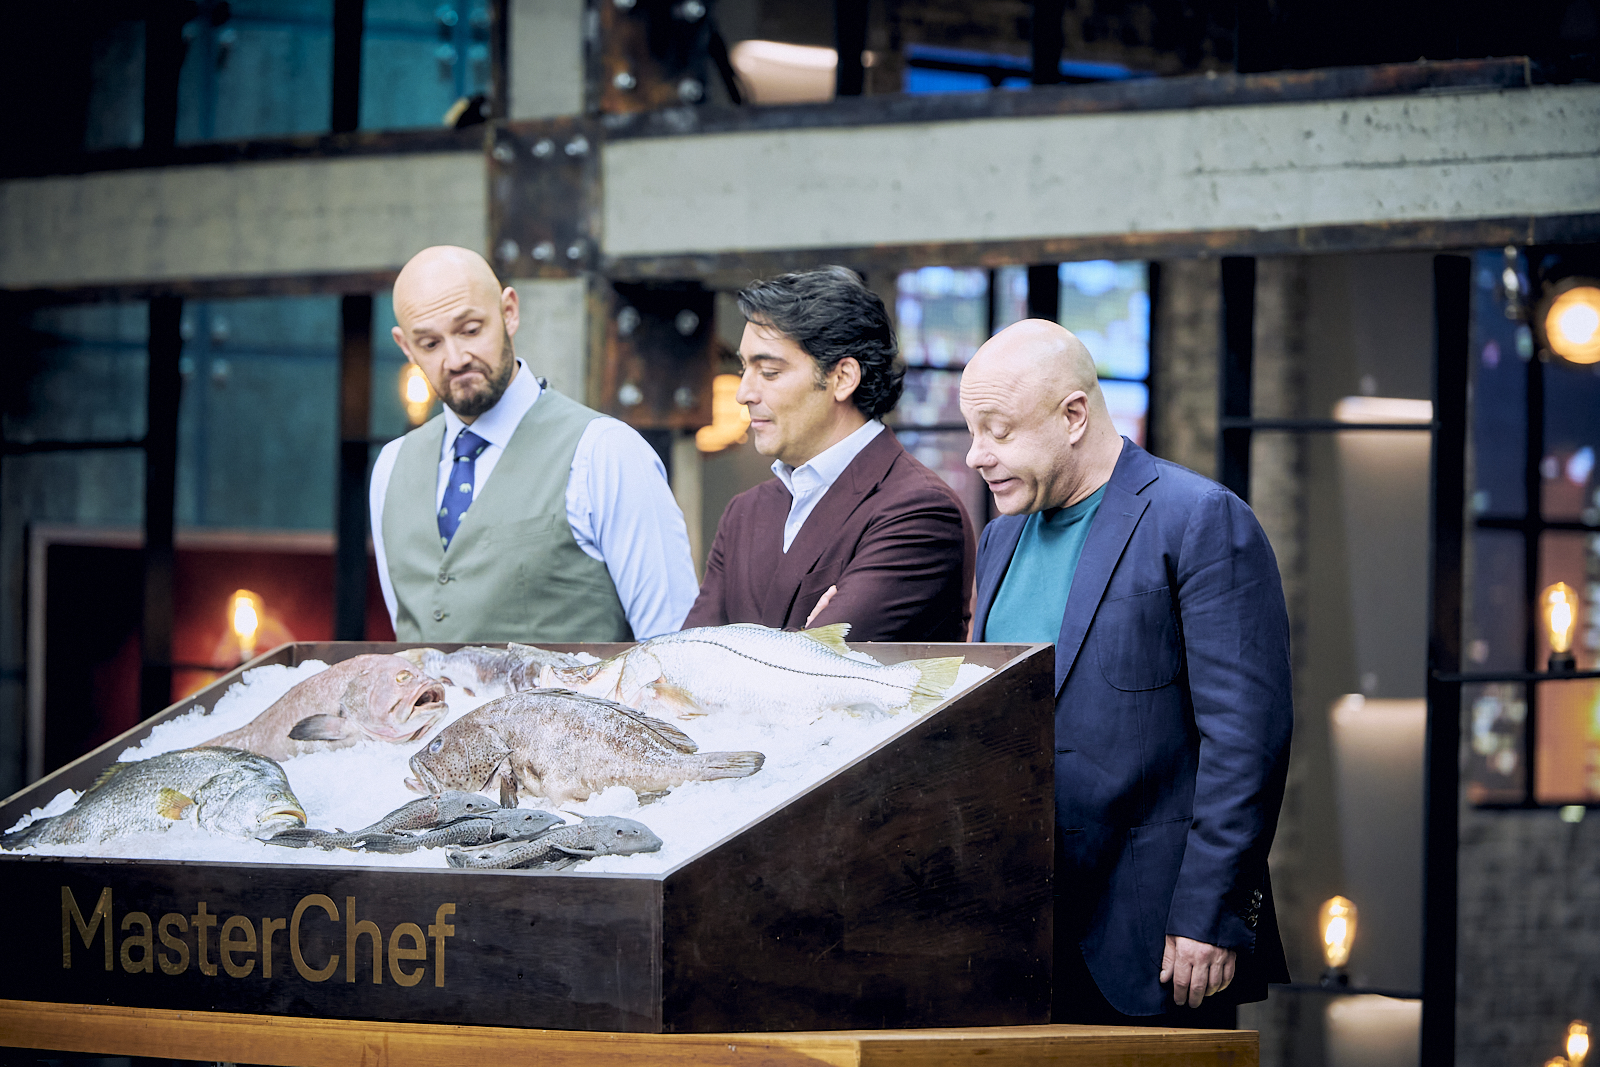 MasterChef: The celebrities cooked tremendous fish. How did it go?